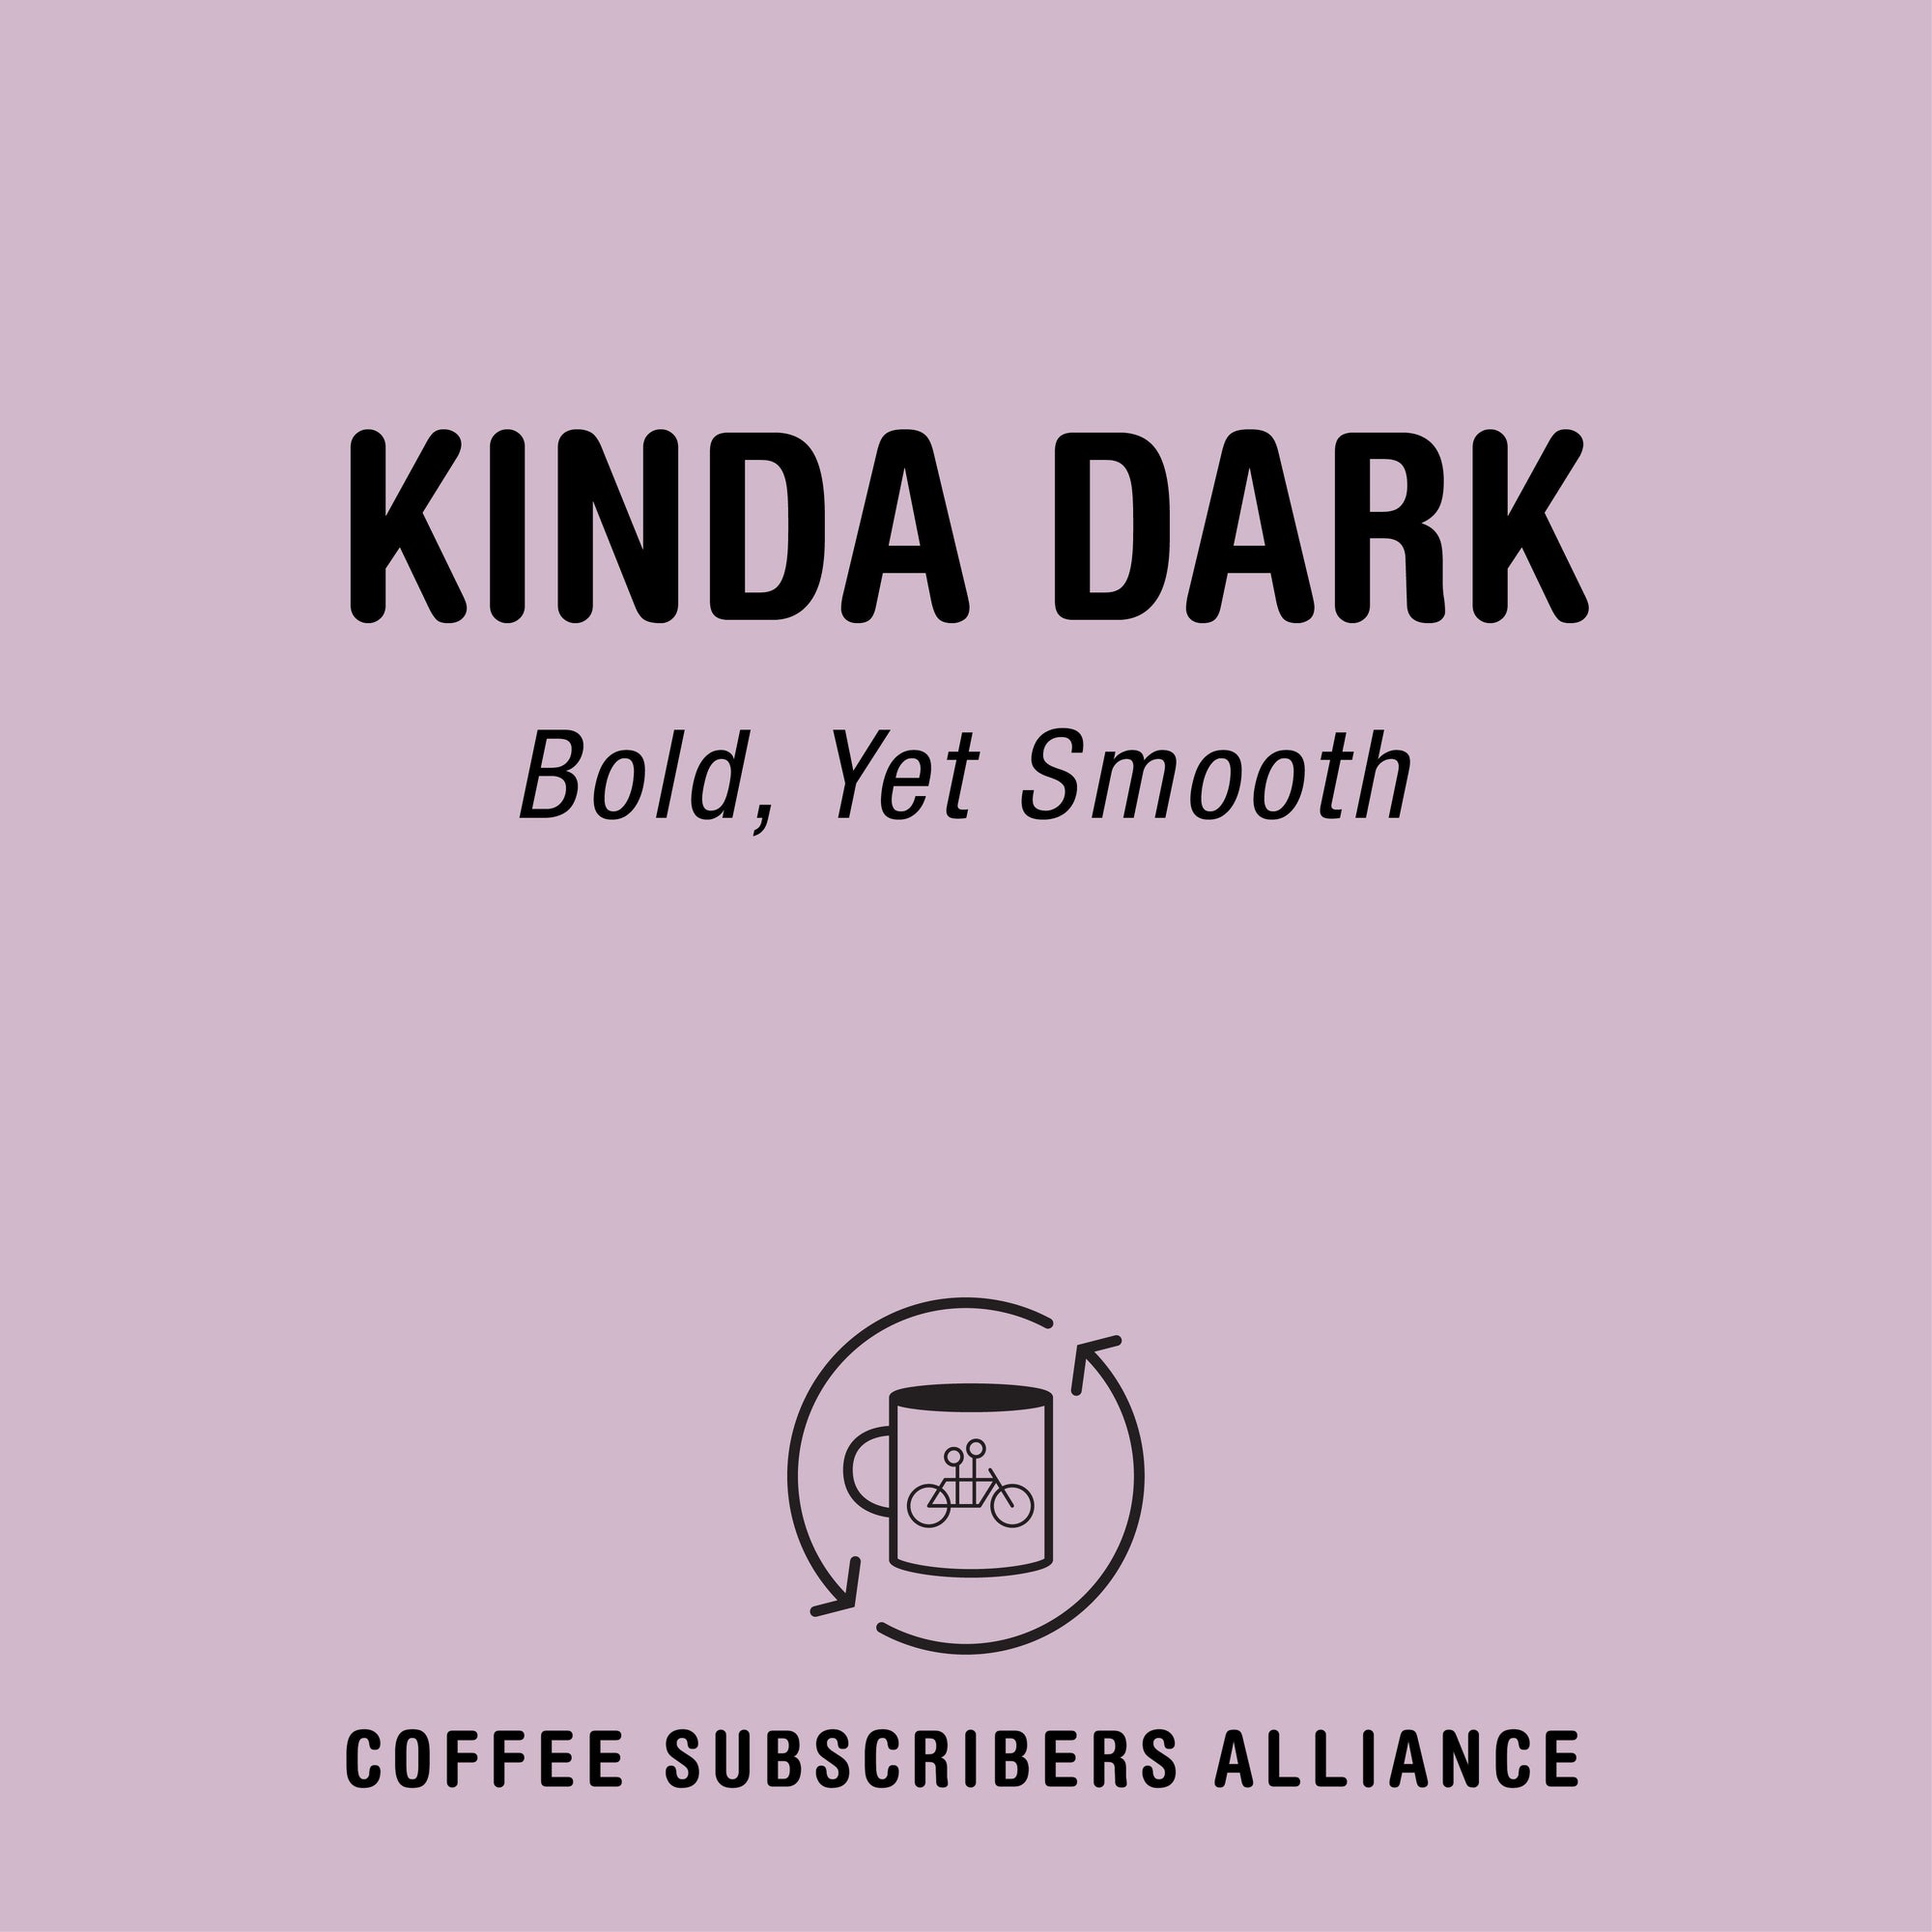 A graphic design with a muted pink background featuring the text "Kinda Dark Subscription Gift - 2 Weeks x 6" at the top, and the logo of a coffee cup with steam forming a heart, captioned.